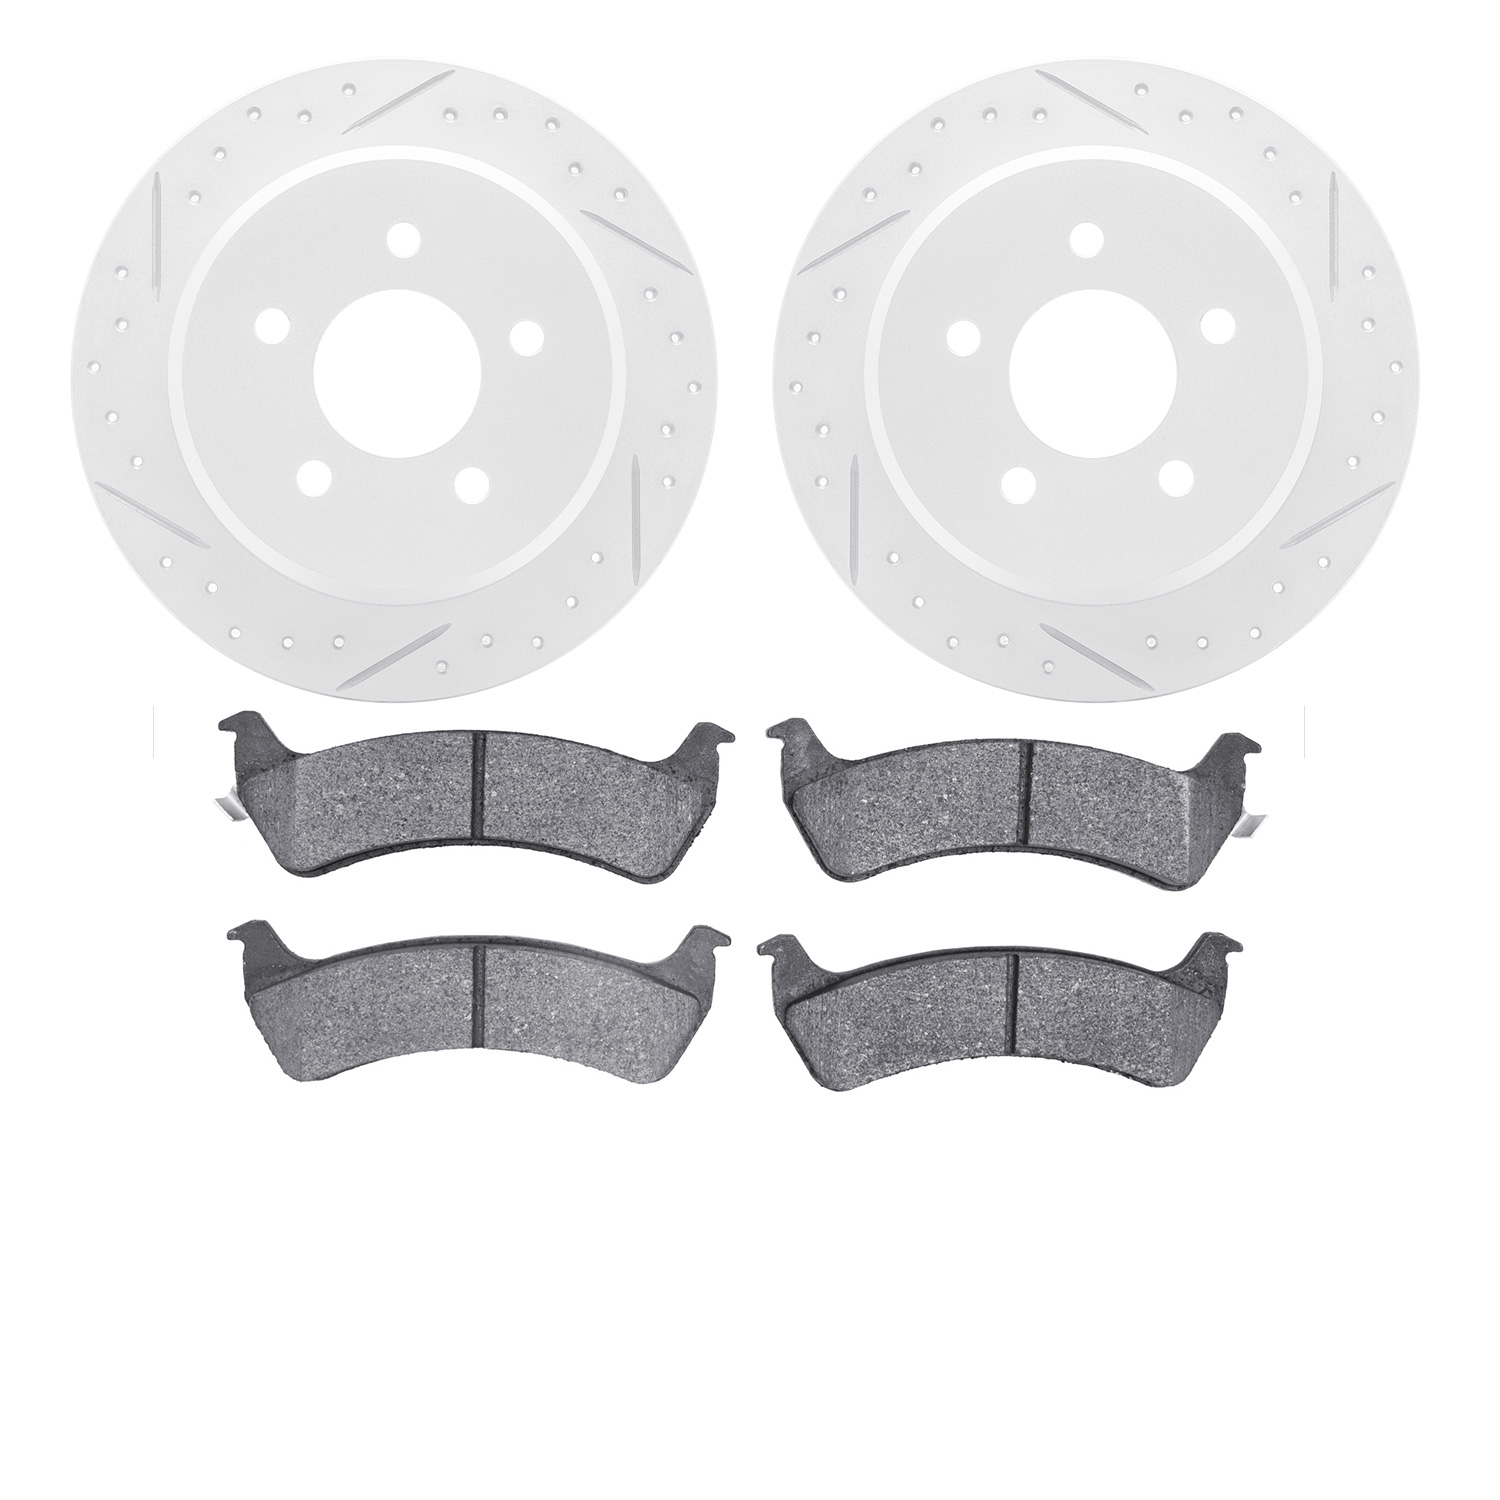 2402-54014 Geoperformance Drilled/Slotted Brake Rotors with Ultimate-Duty Brake Pads Kit, 2001-2002 Ford/Lincoln/Mercury/Mazda,